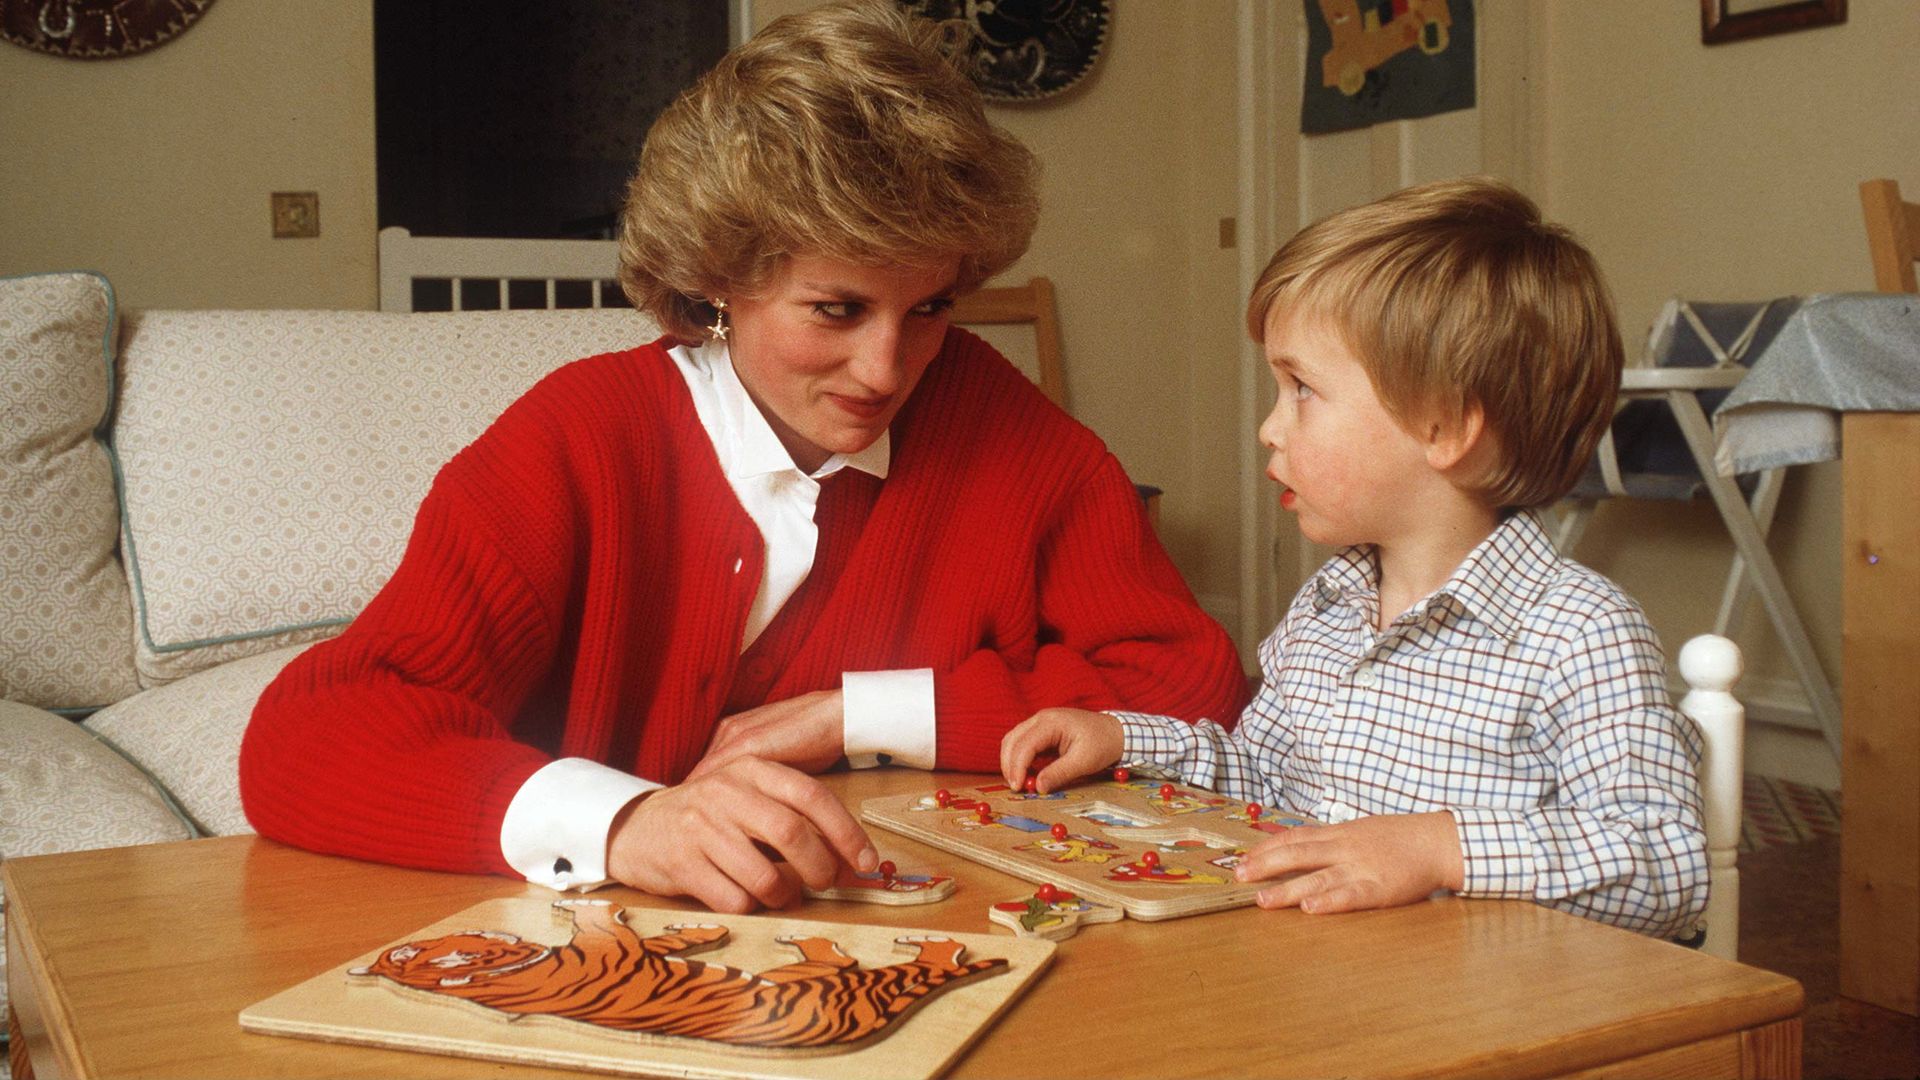 Diana helping William with a puzzle at home